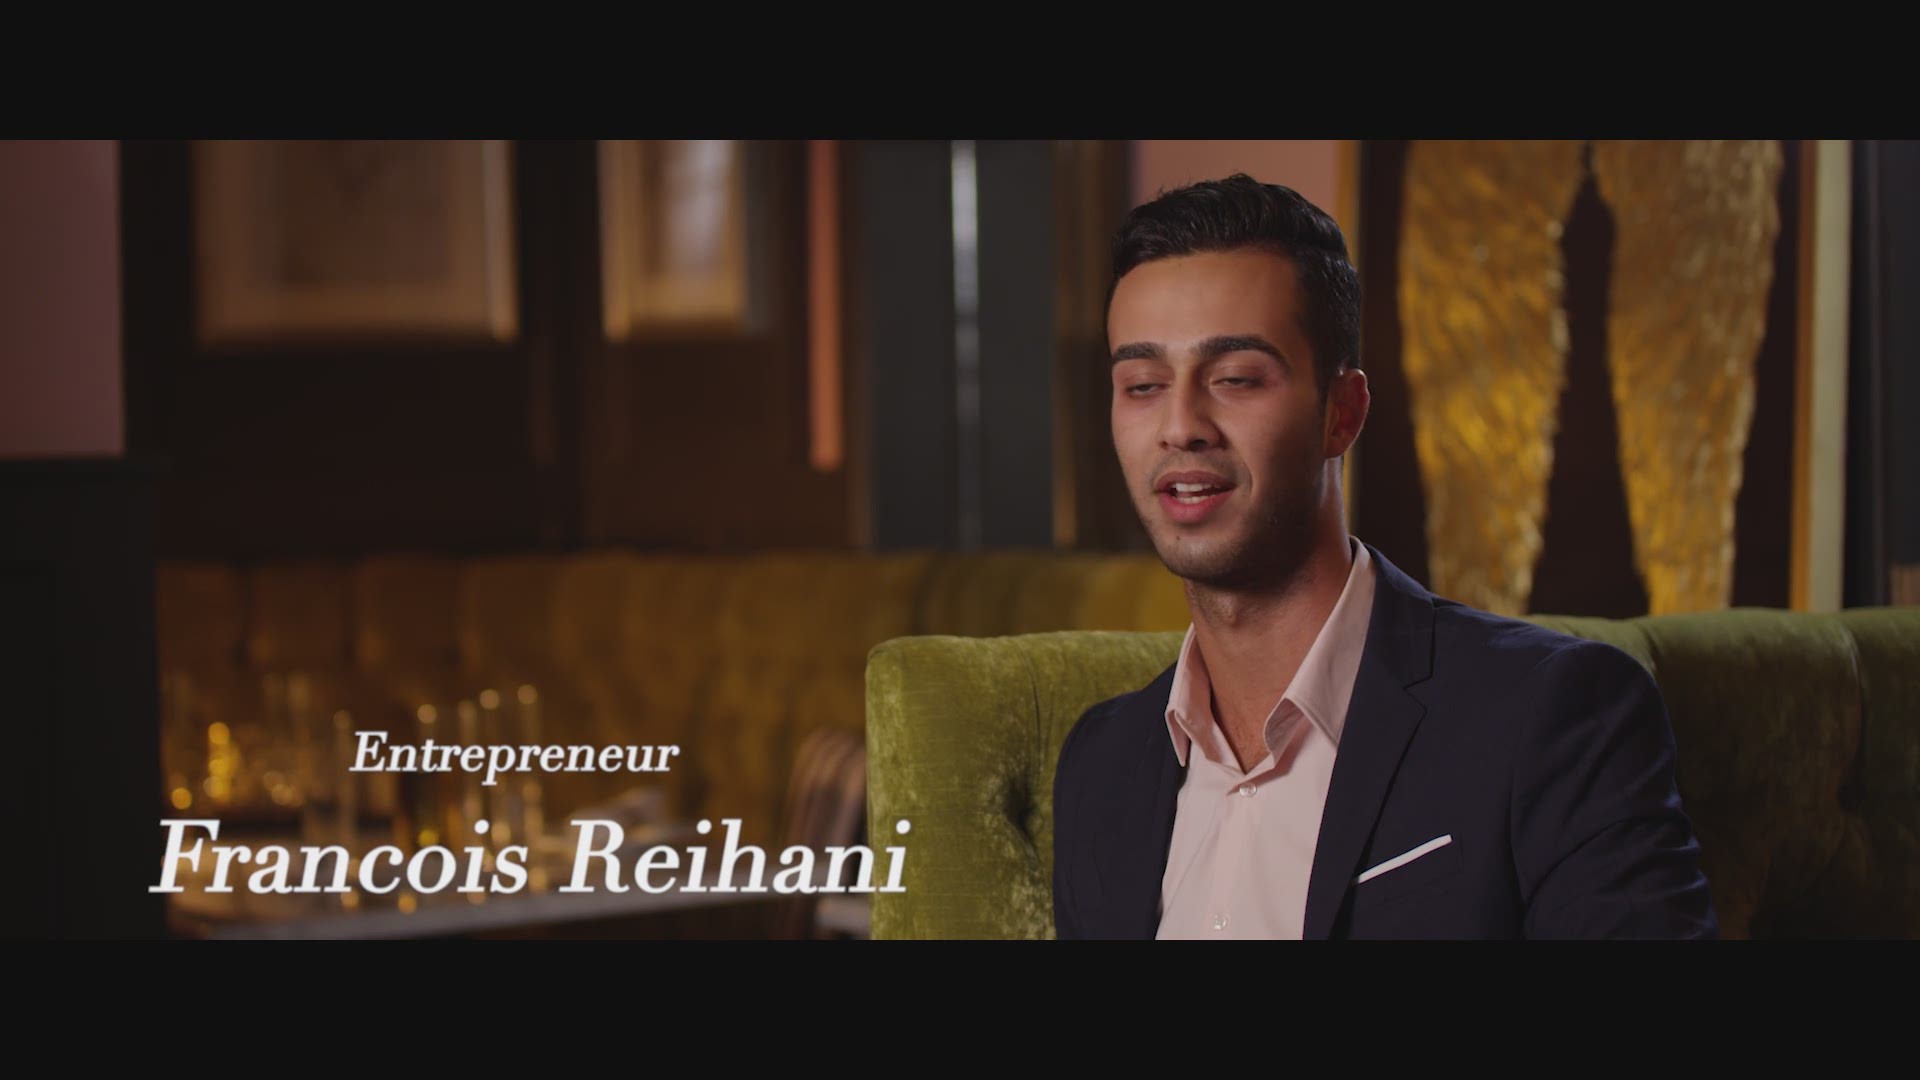 He started his first restaurant at 20 and his first bar when he was barely old enough to drink. Now, see how SMU undergrad, Francois Reihani is adding philanthropist to his already impressive resum�.